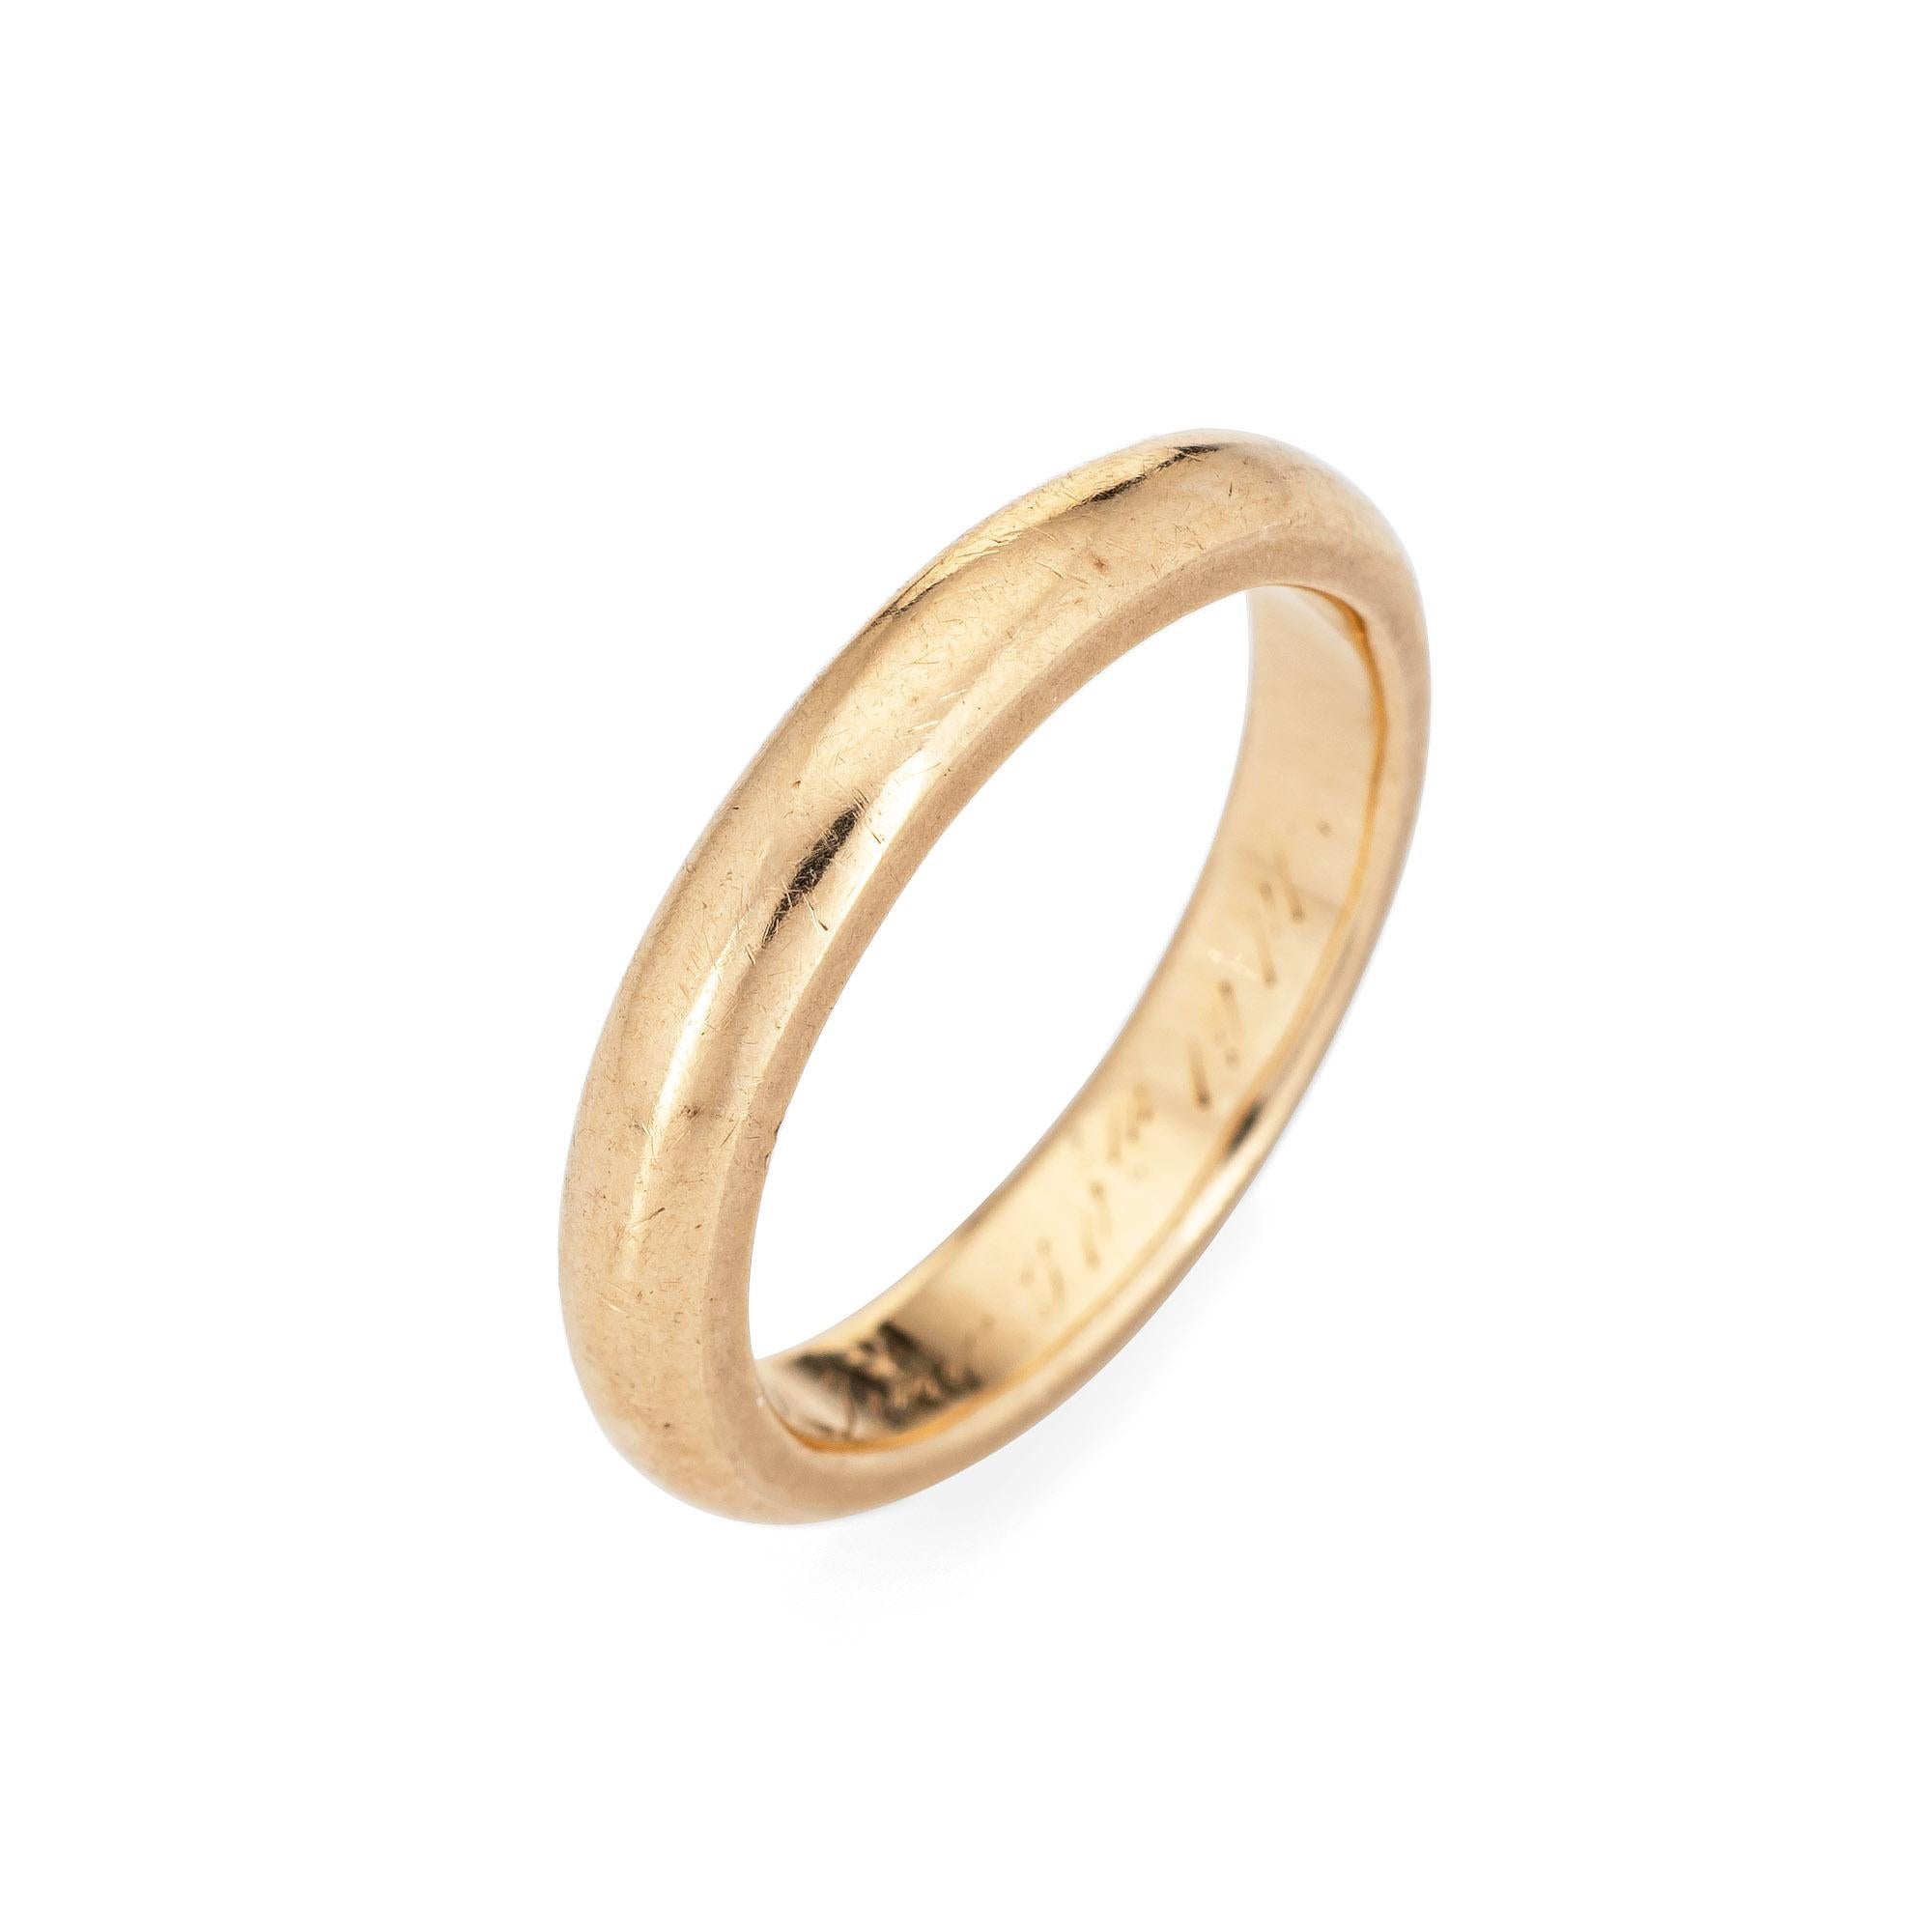 Elegant antique Edwardian wedding band (circa 1914) crafted in 14k white gold. 

The ring epitomizes antique charm and would make a lovely wedding band. Also great worn alone or stacked with your jewelry from any era. The inner band is engraved yet